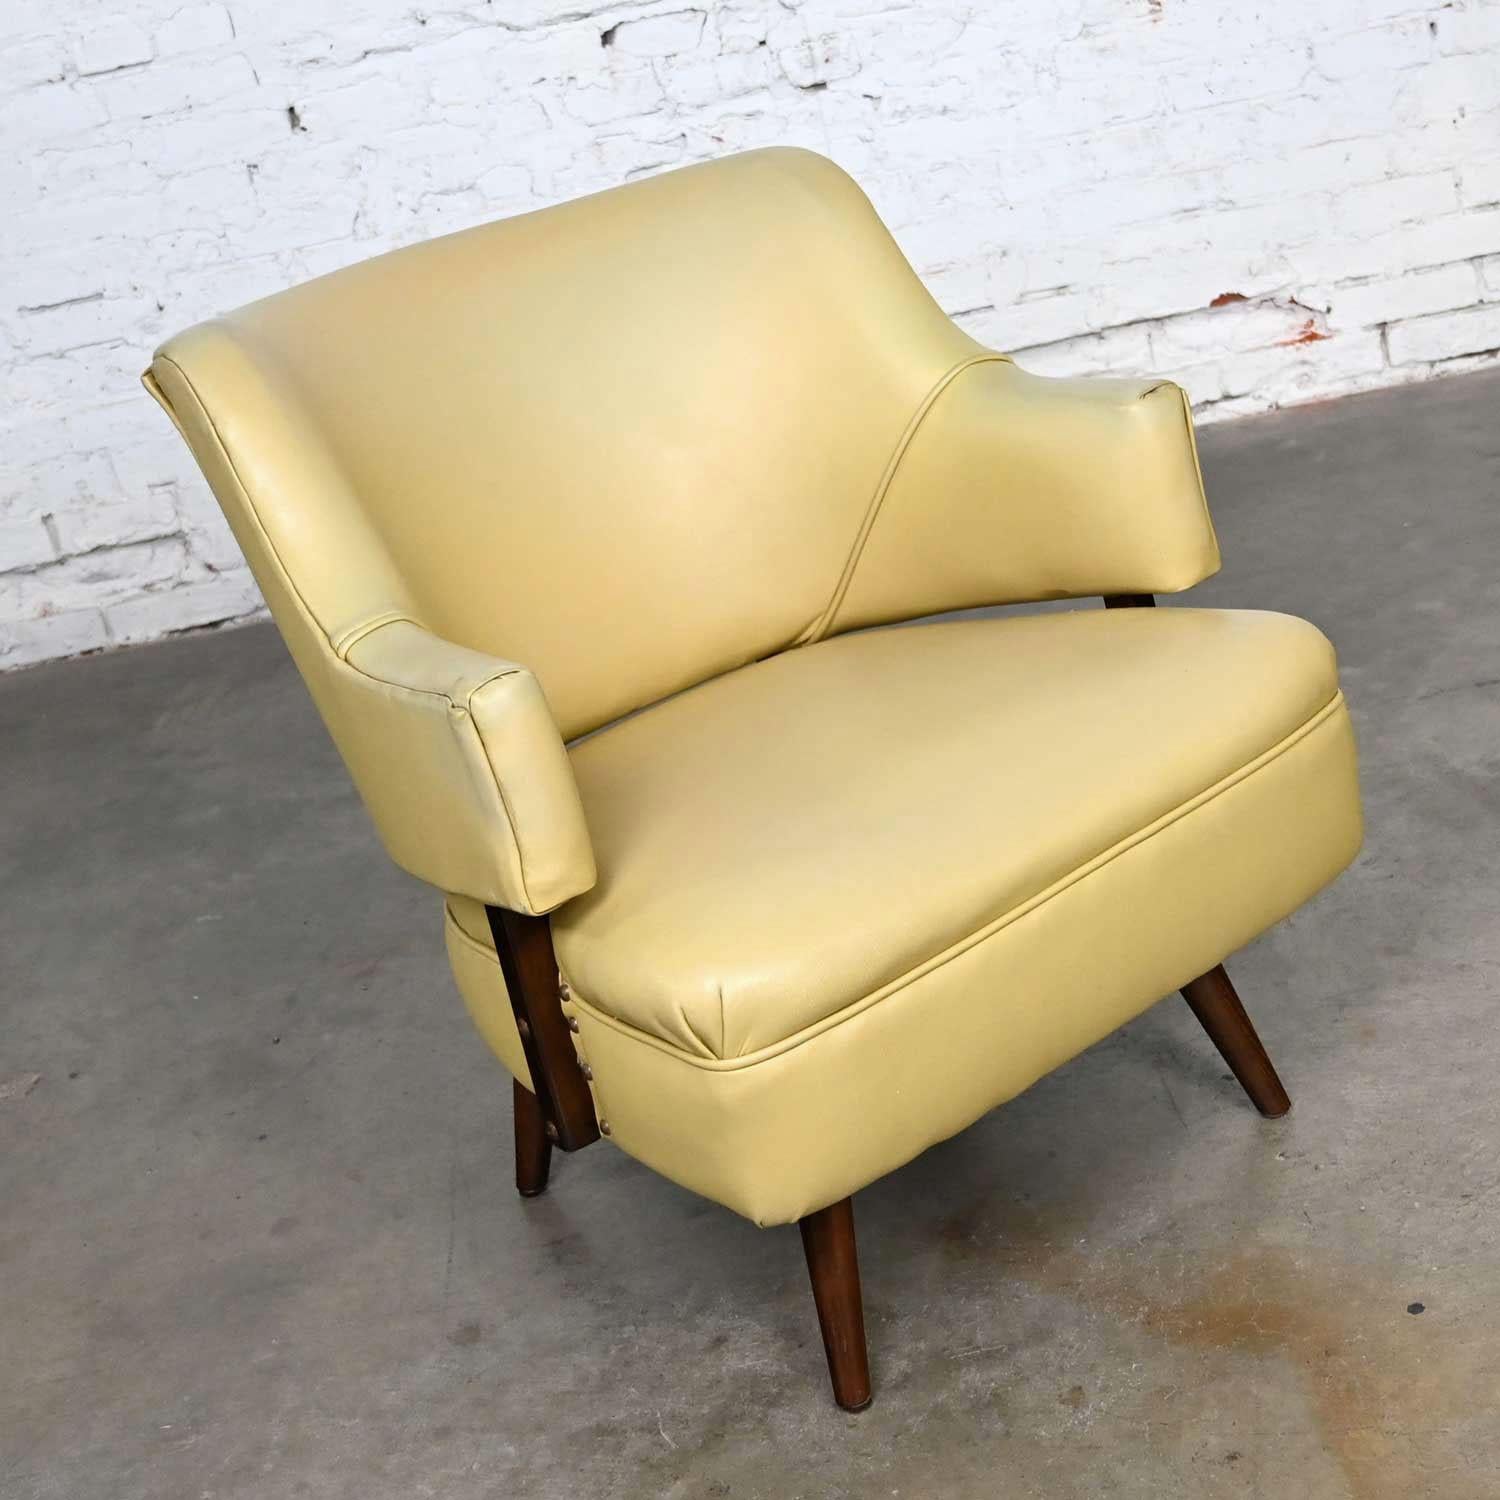 Lovely vintage mid-century modern khaki vinyl faux leather accent or side armchair in the style of Kroehler. Beautiful condition, keeping in mind that this is vintage and not new so will have signs of use and wear. The wood legs and supports have